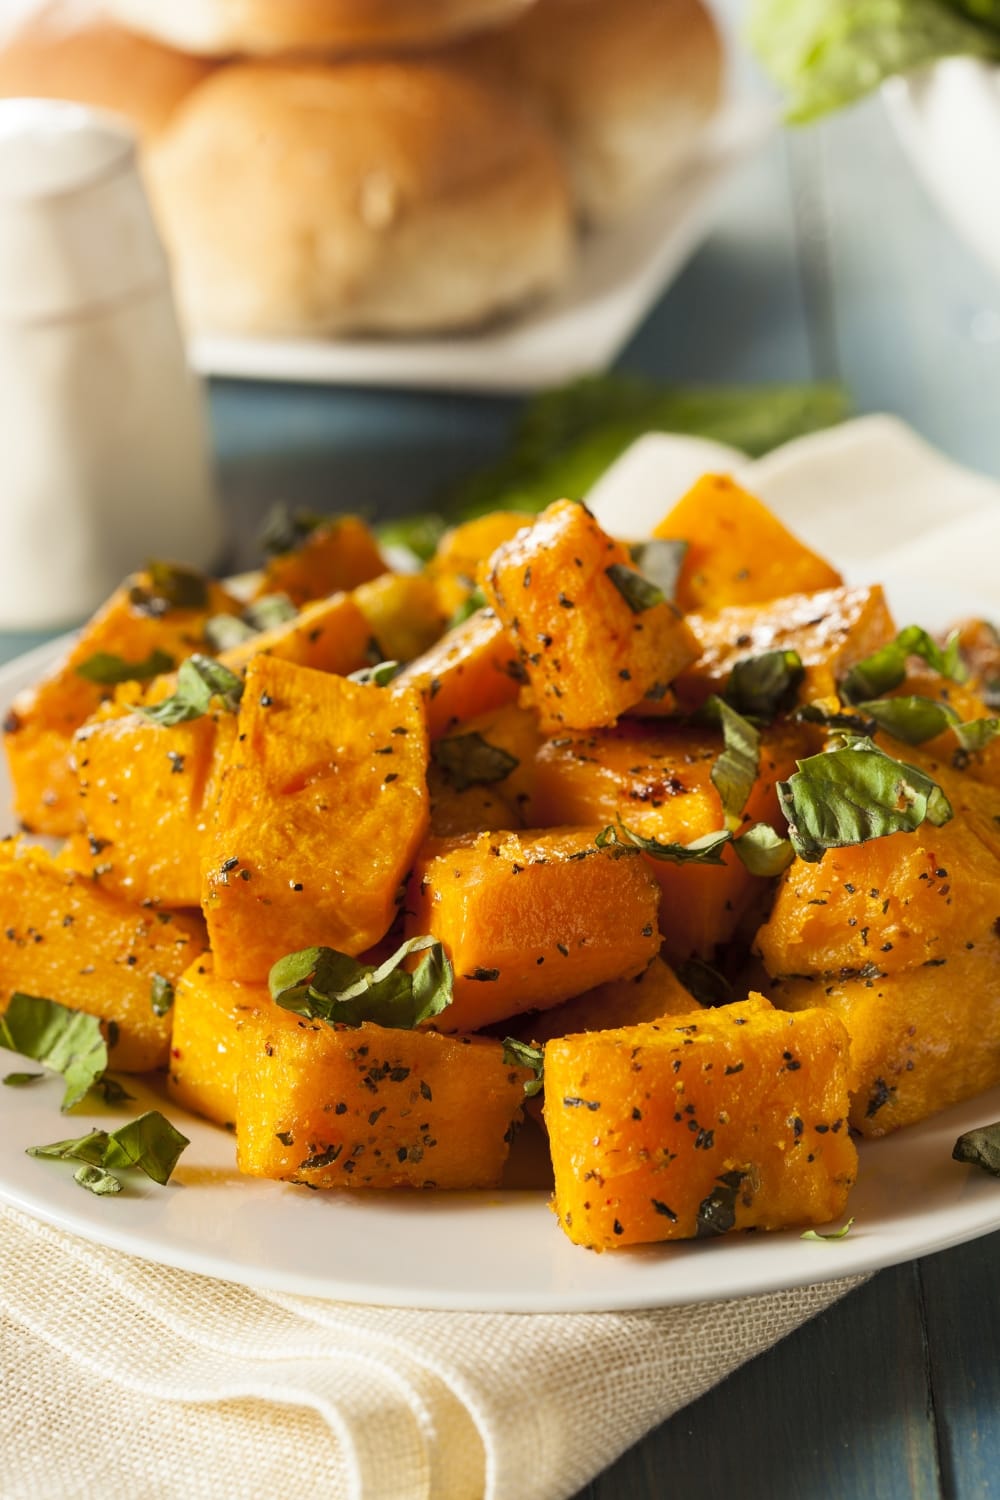 Roasted butternut squash with herbs in a white plate